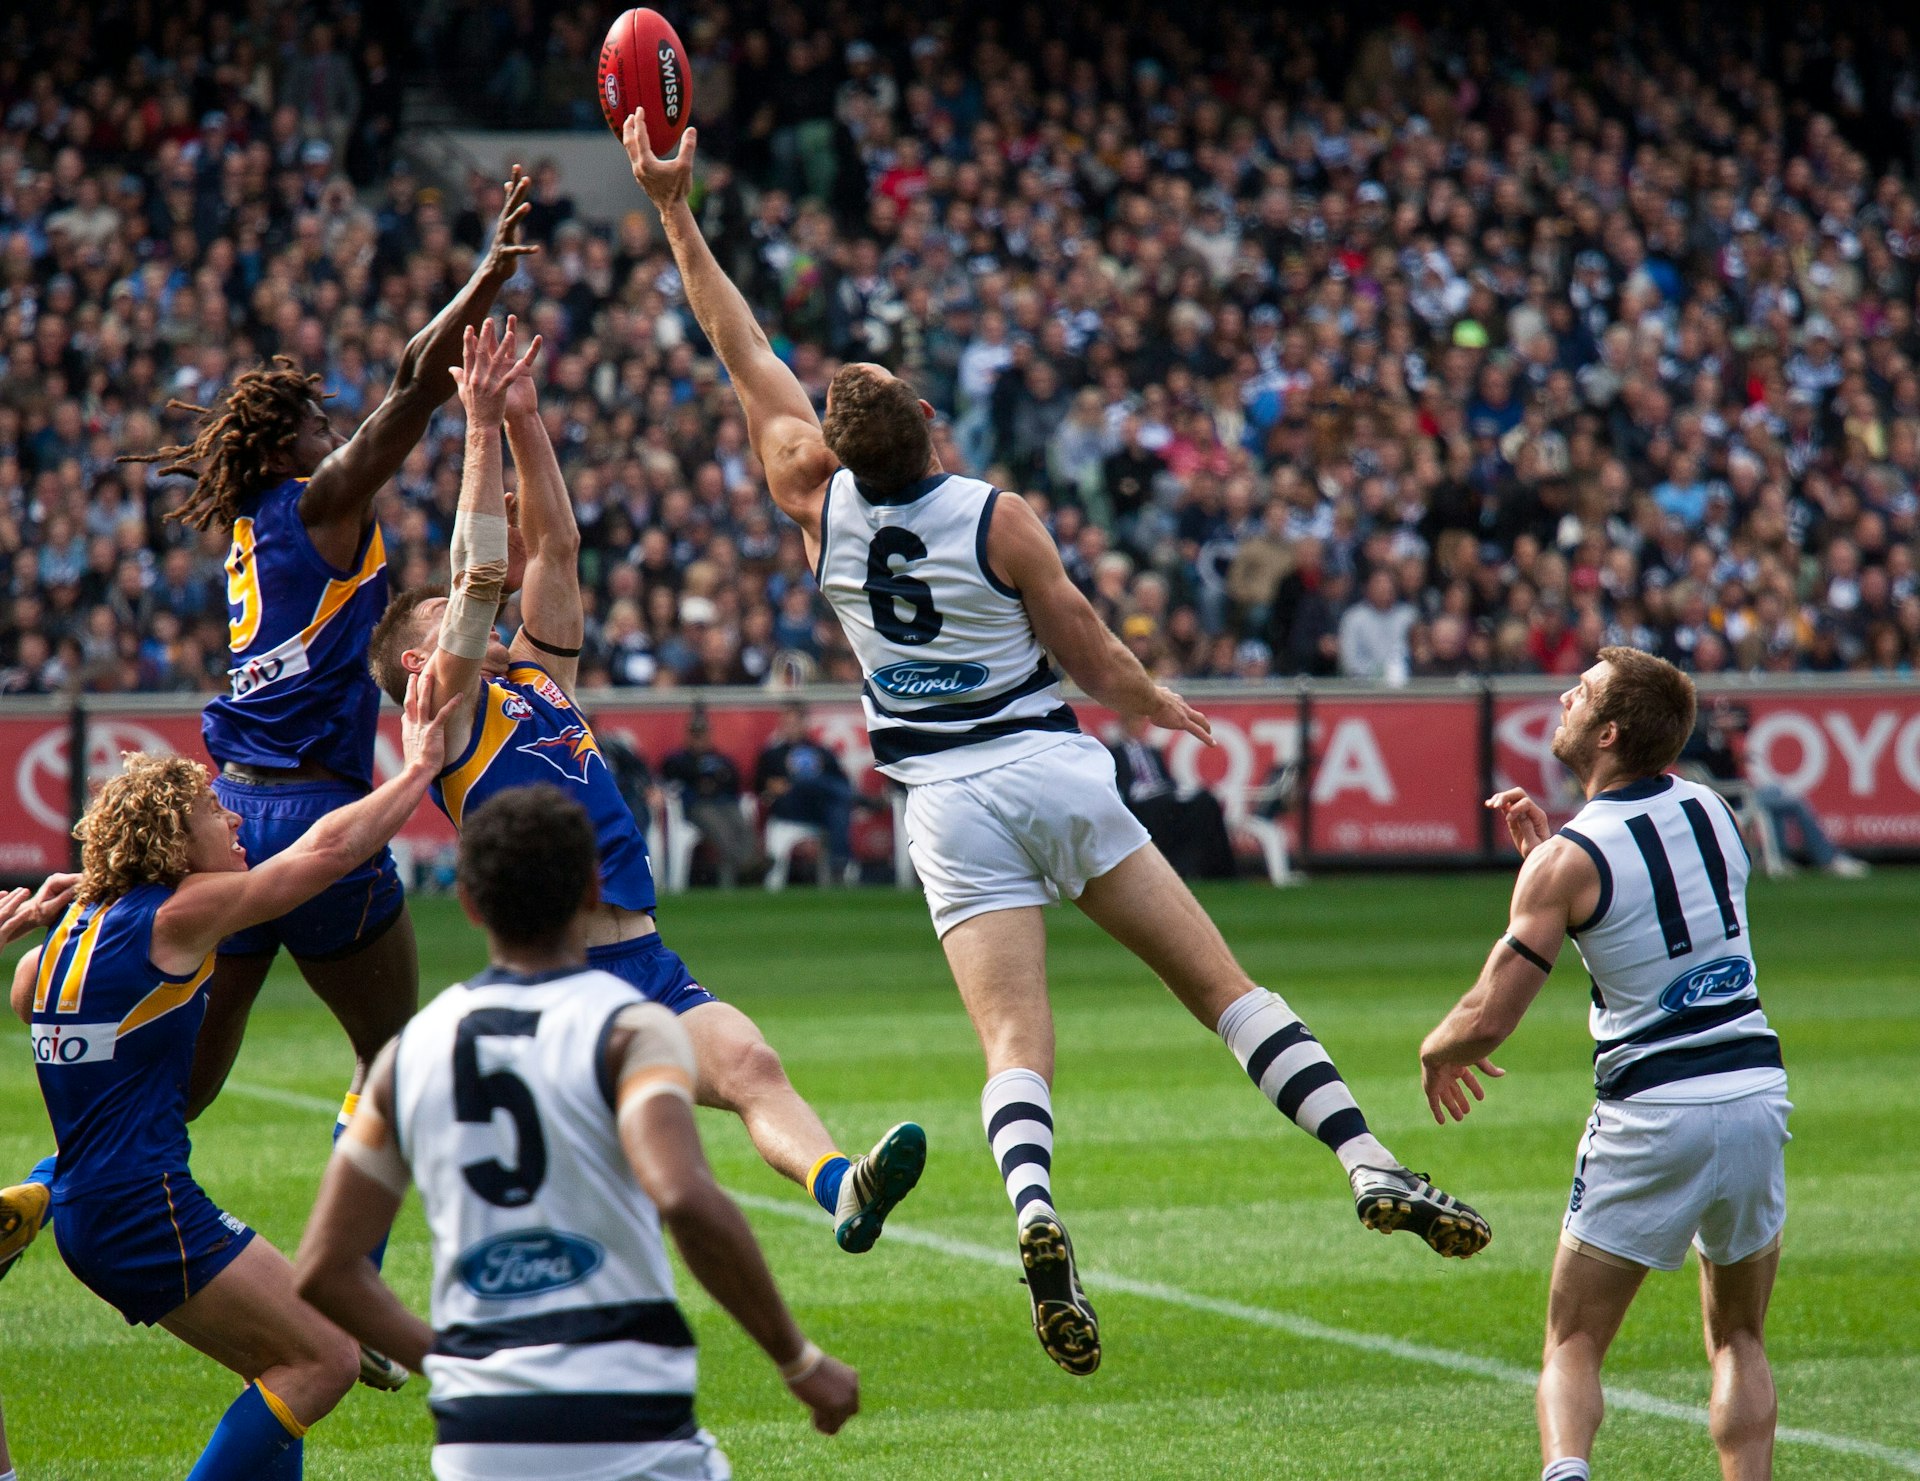 MELAustralian Rules Football player Brad Ottens (number 6) stretched for a ruck contest during Geelong's preliminary final win over West Coast on September 24, 2011 in Melbourne, Australia.